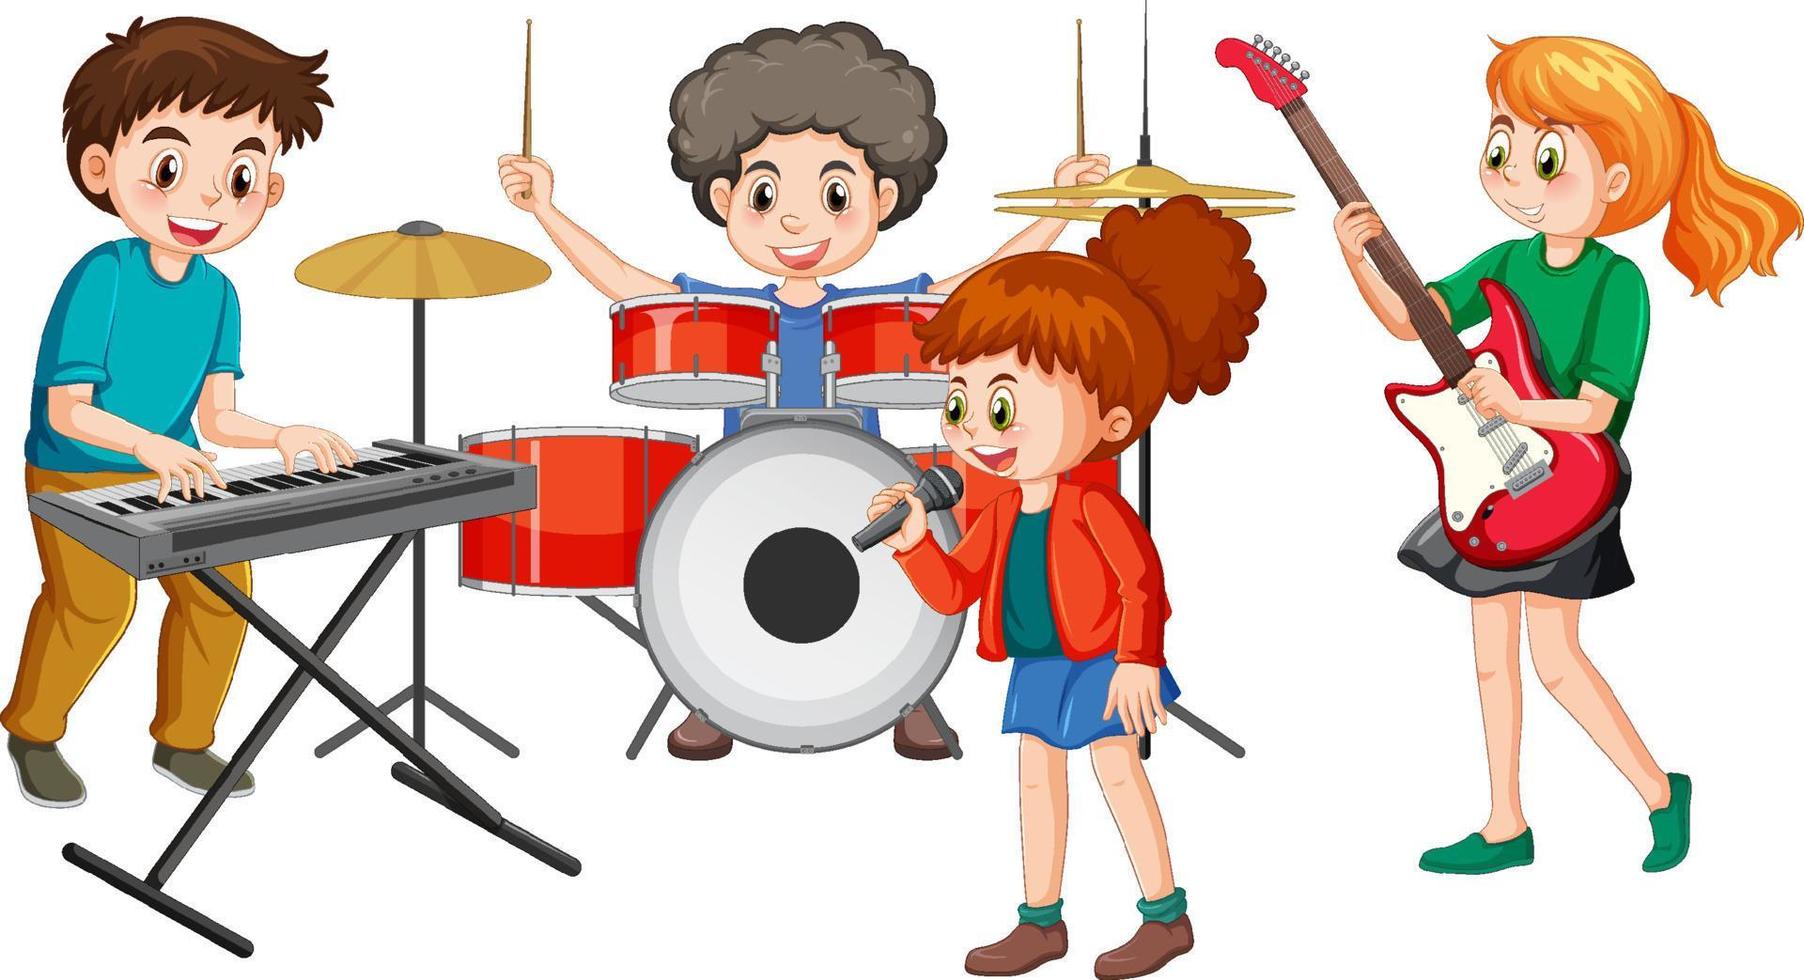 Children playing different musical instruments vector